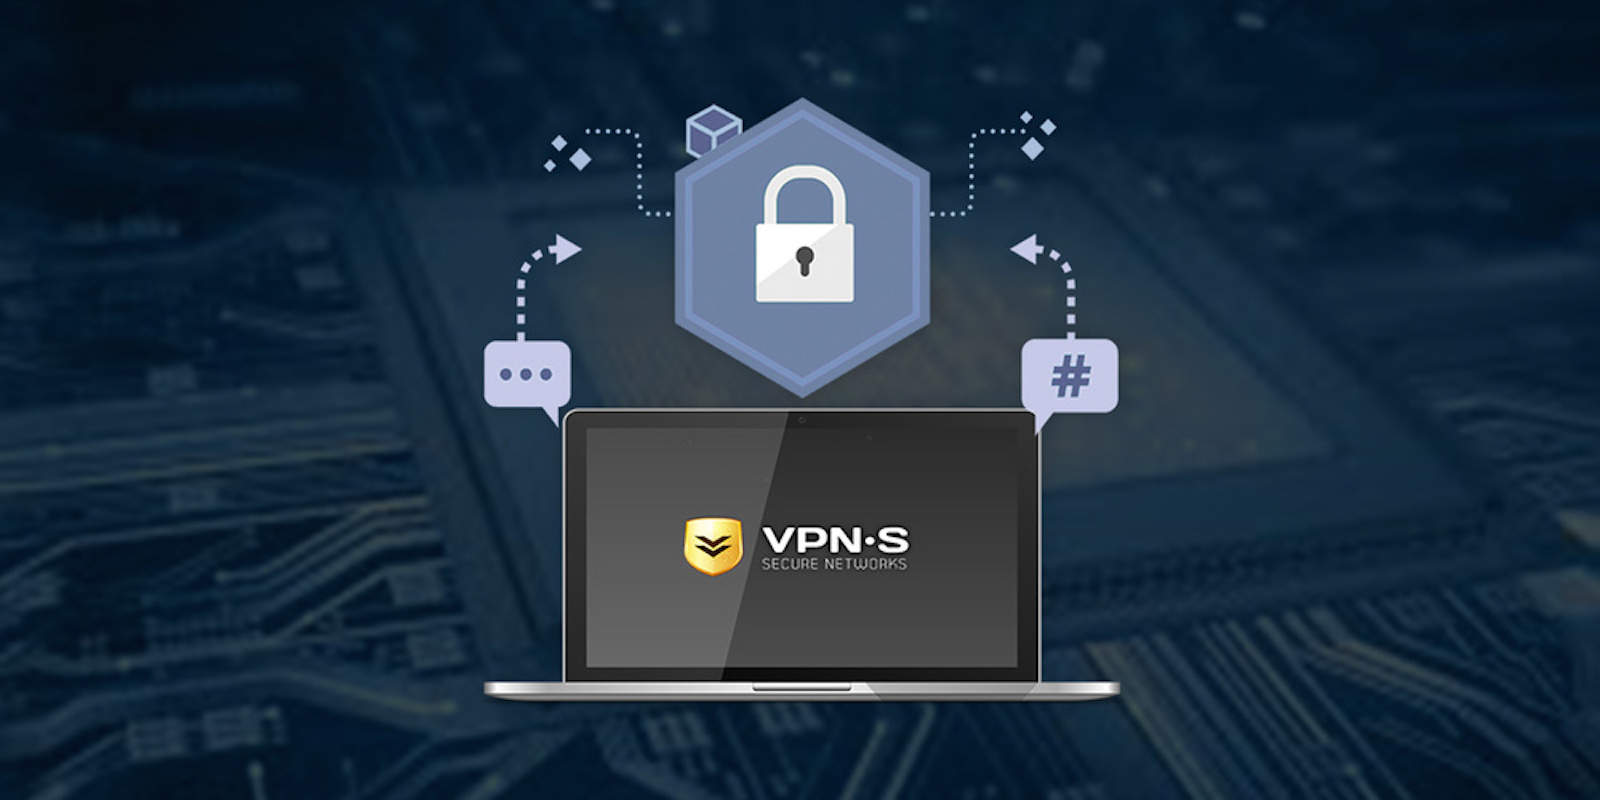 Get a lifetime of secure, anonymous, and unrestricted web activity through VPNSecure.